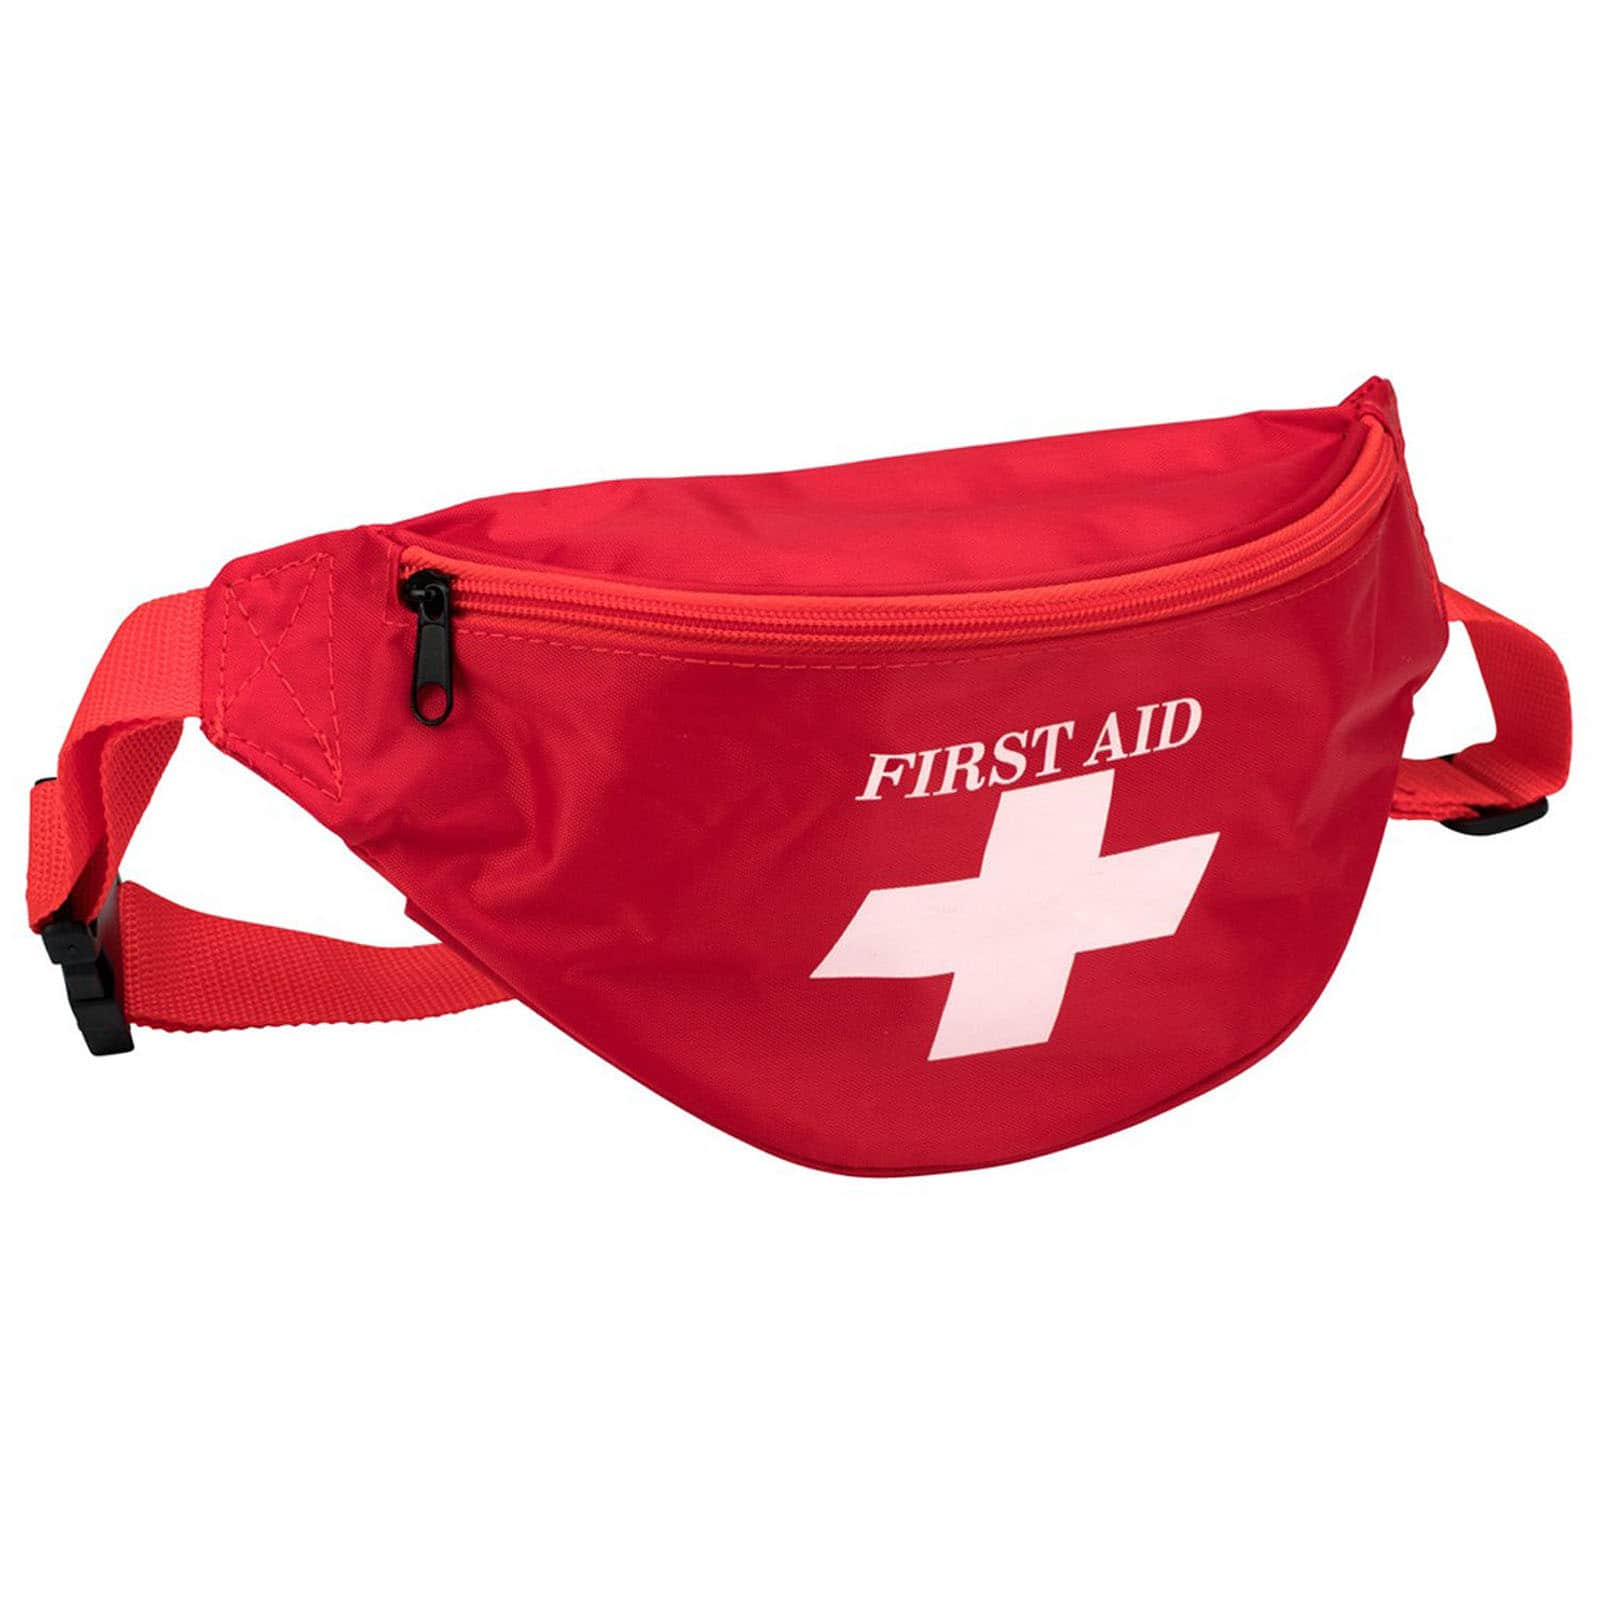 Contains 48 Pieces PhysiciansCare First Aid Fanny Pack 